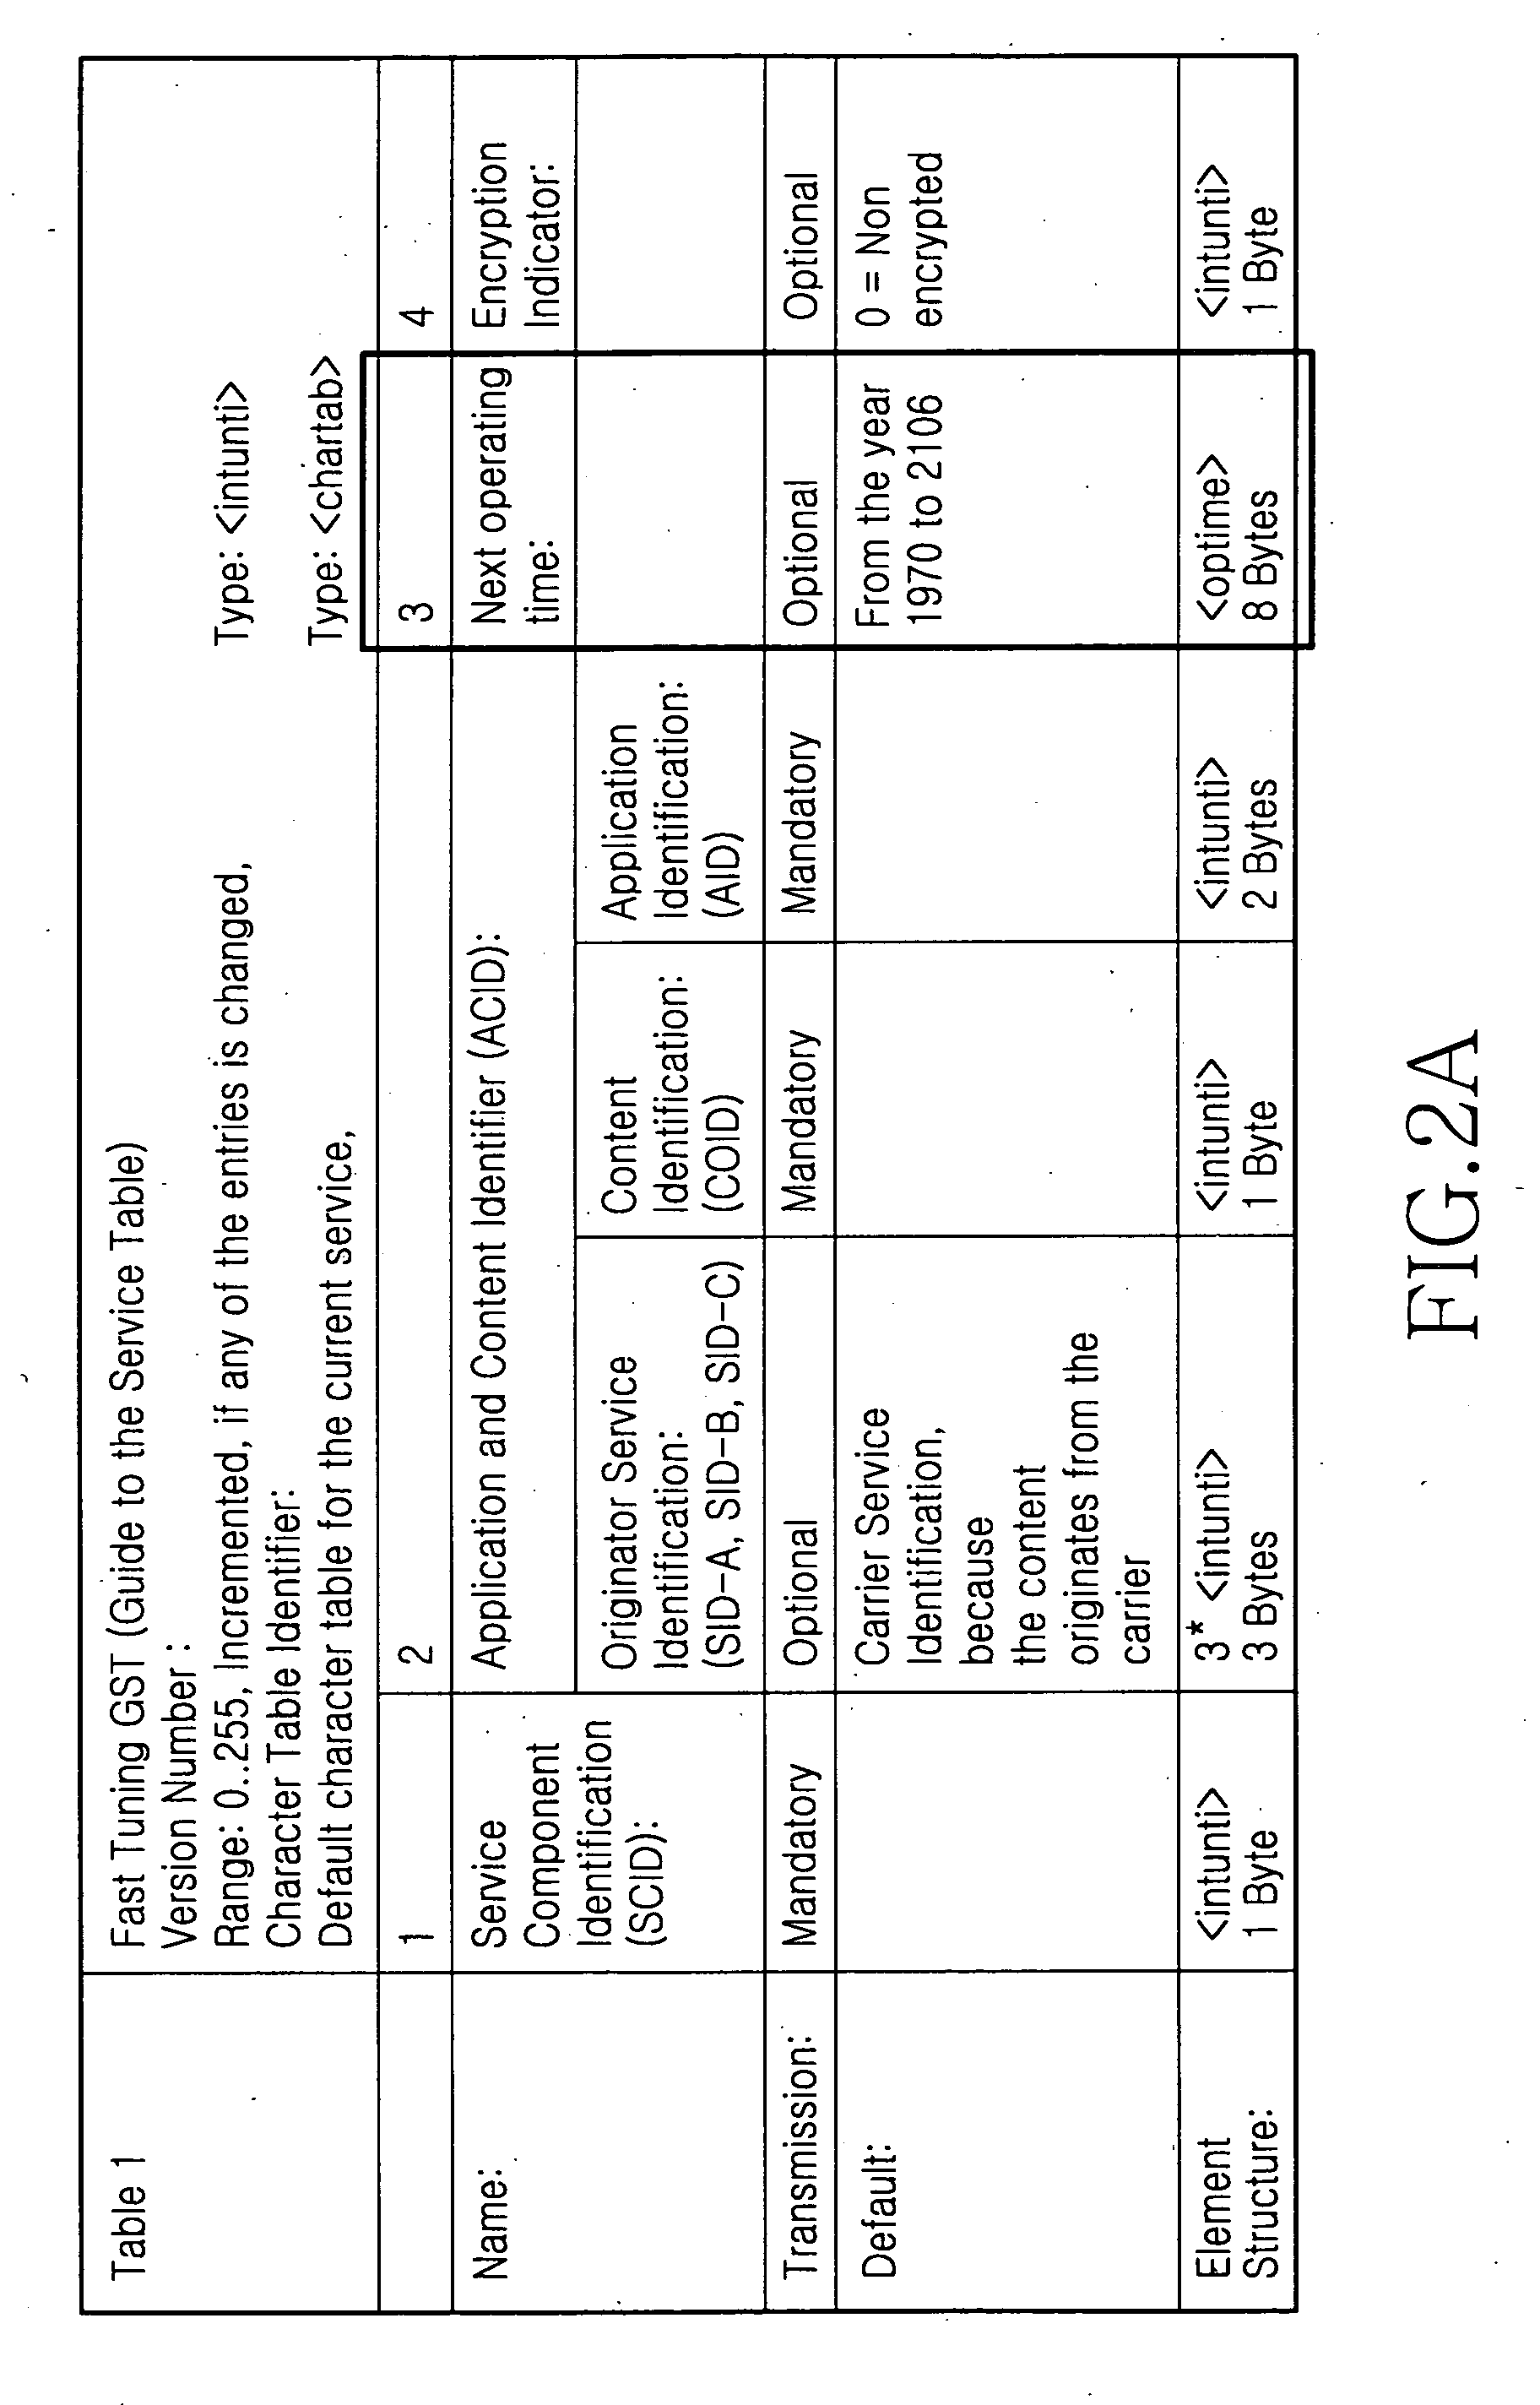 System and method for selectively receiving digital multimedia broadcasting (DMB) data broadcast